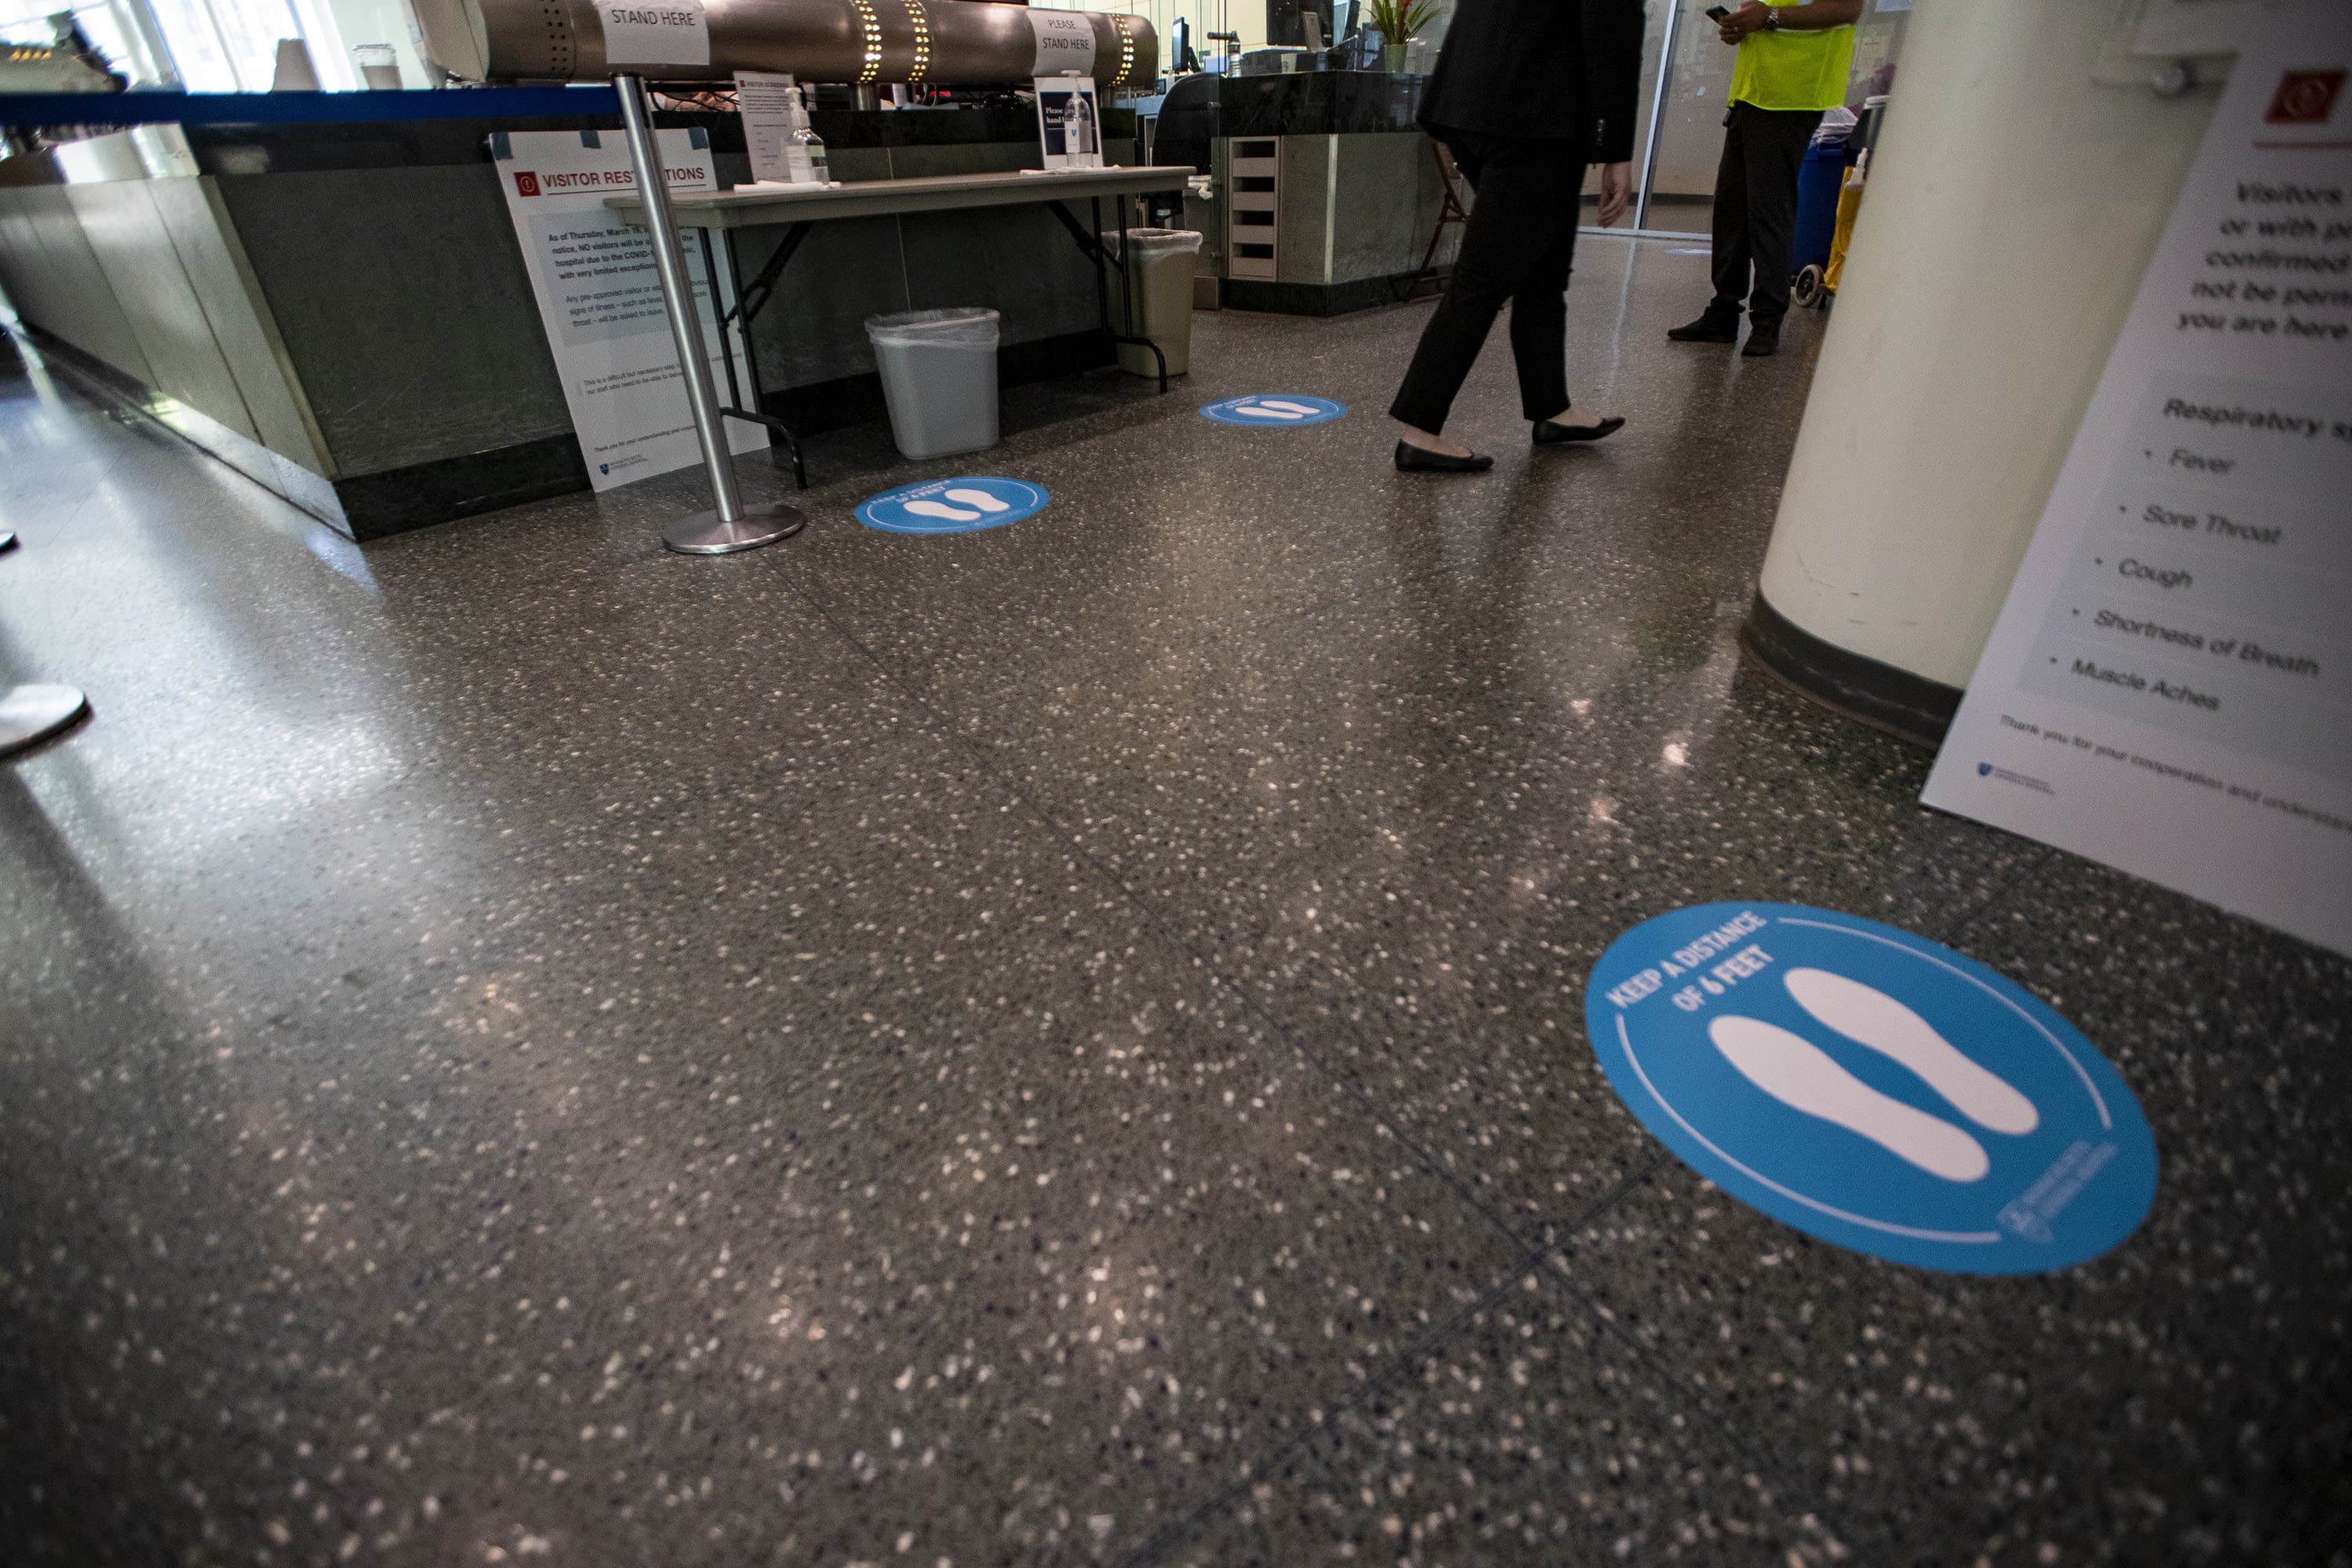 Stickers, at 6-foot intervals, map the path for patients at MGH.(Jesse Costa/WBUR)